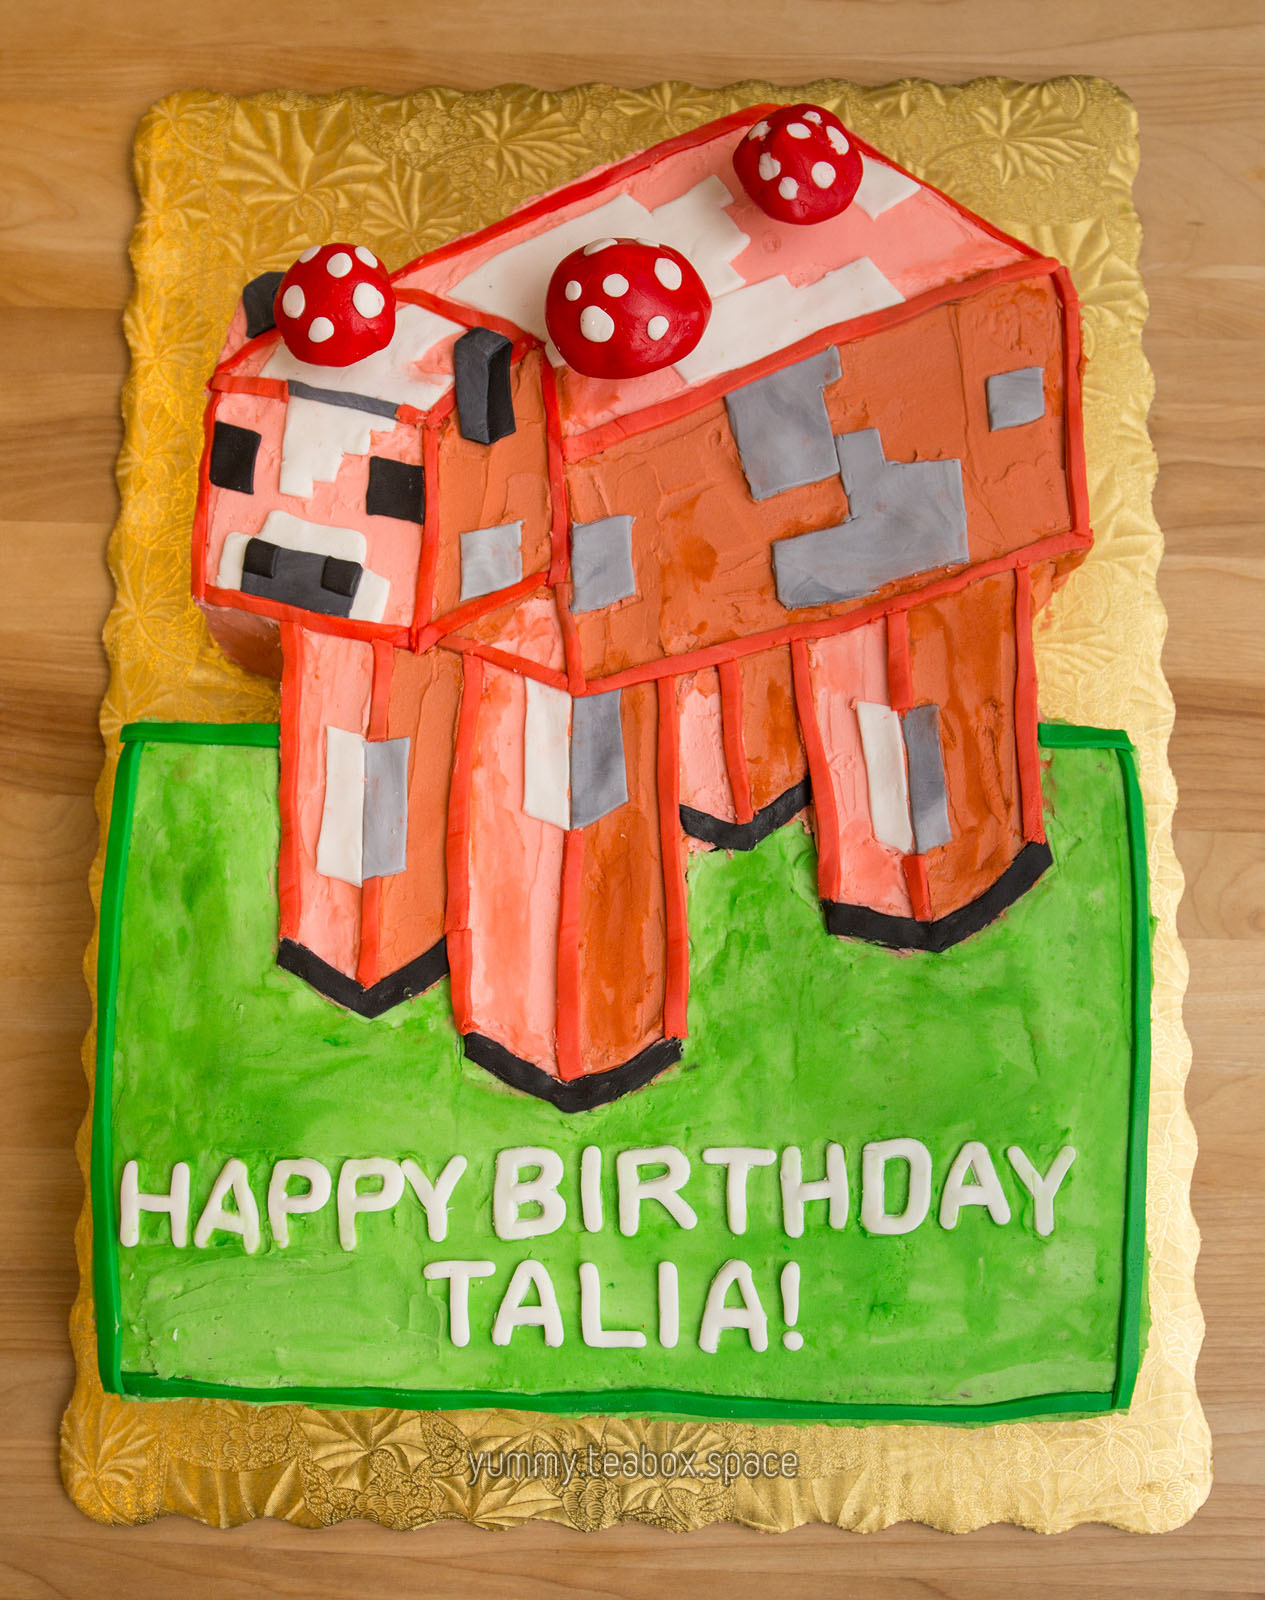 Cake that looks like a Minecraft Mooshroom, which is a red cow with mushrooms growing on top. Cake says "Happy Birthday Talia".